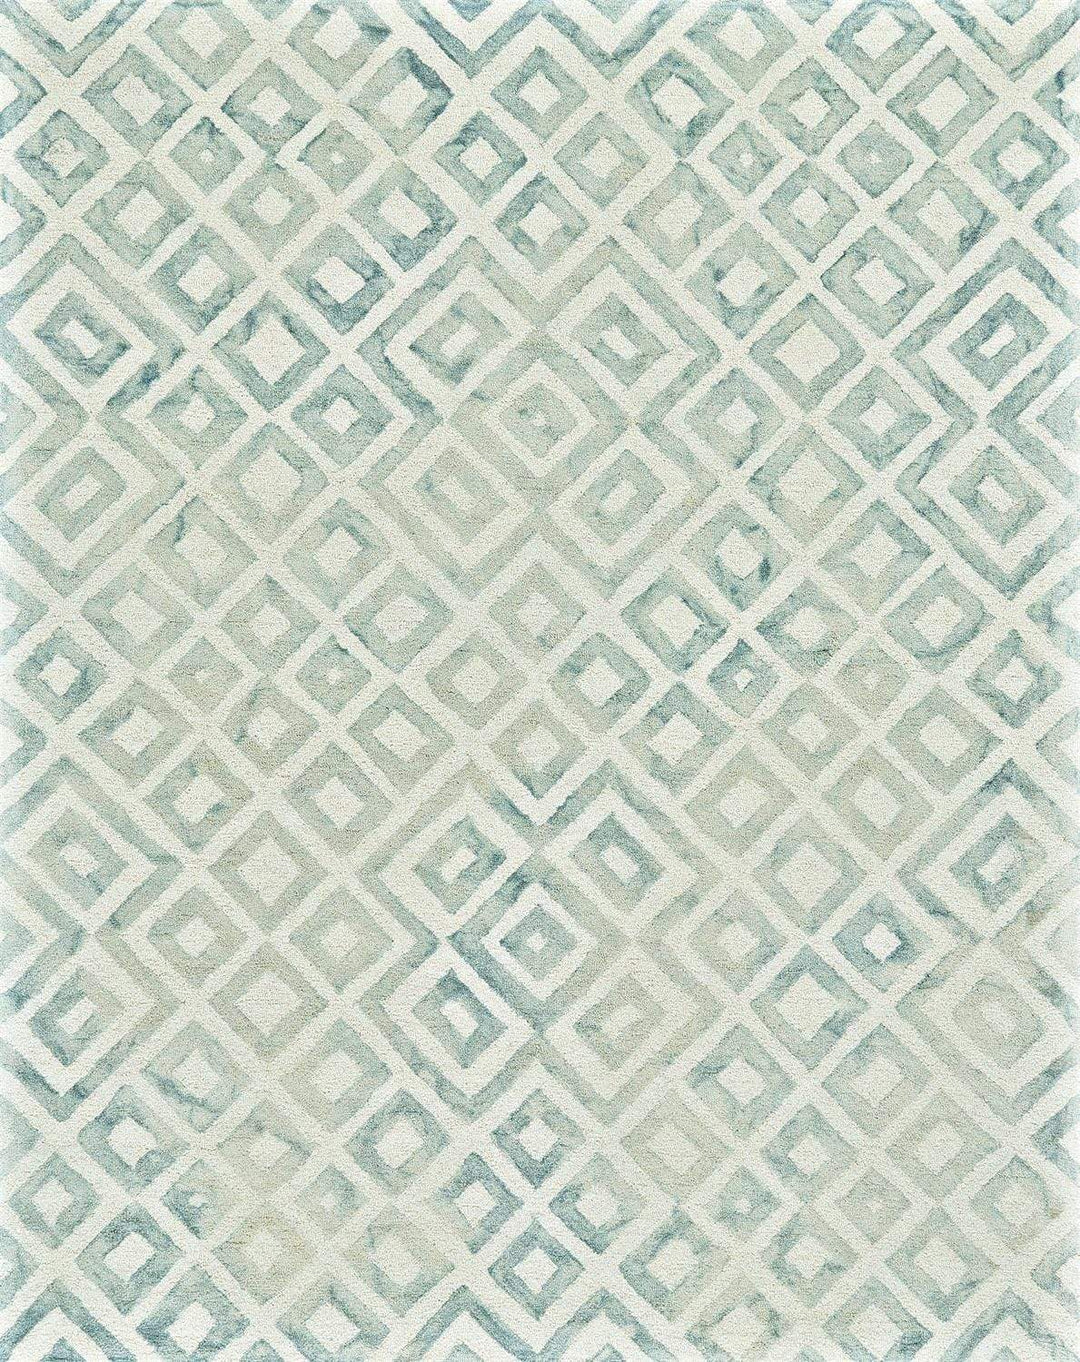 Feizy Feizy Lorrain Patterned Wool Rug - Available in 6 Sizes - Teal Green Diamonds 3'-6" x 5'-6" 6108572FMNR000C50